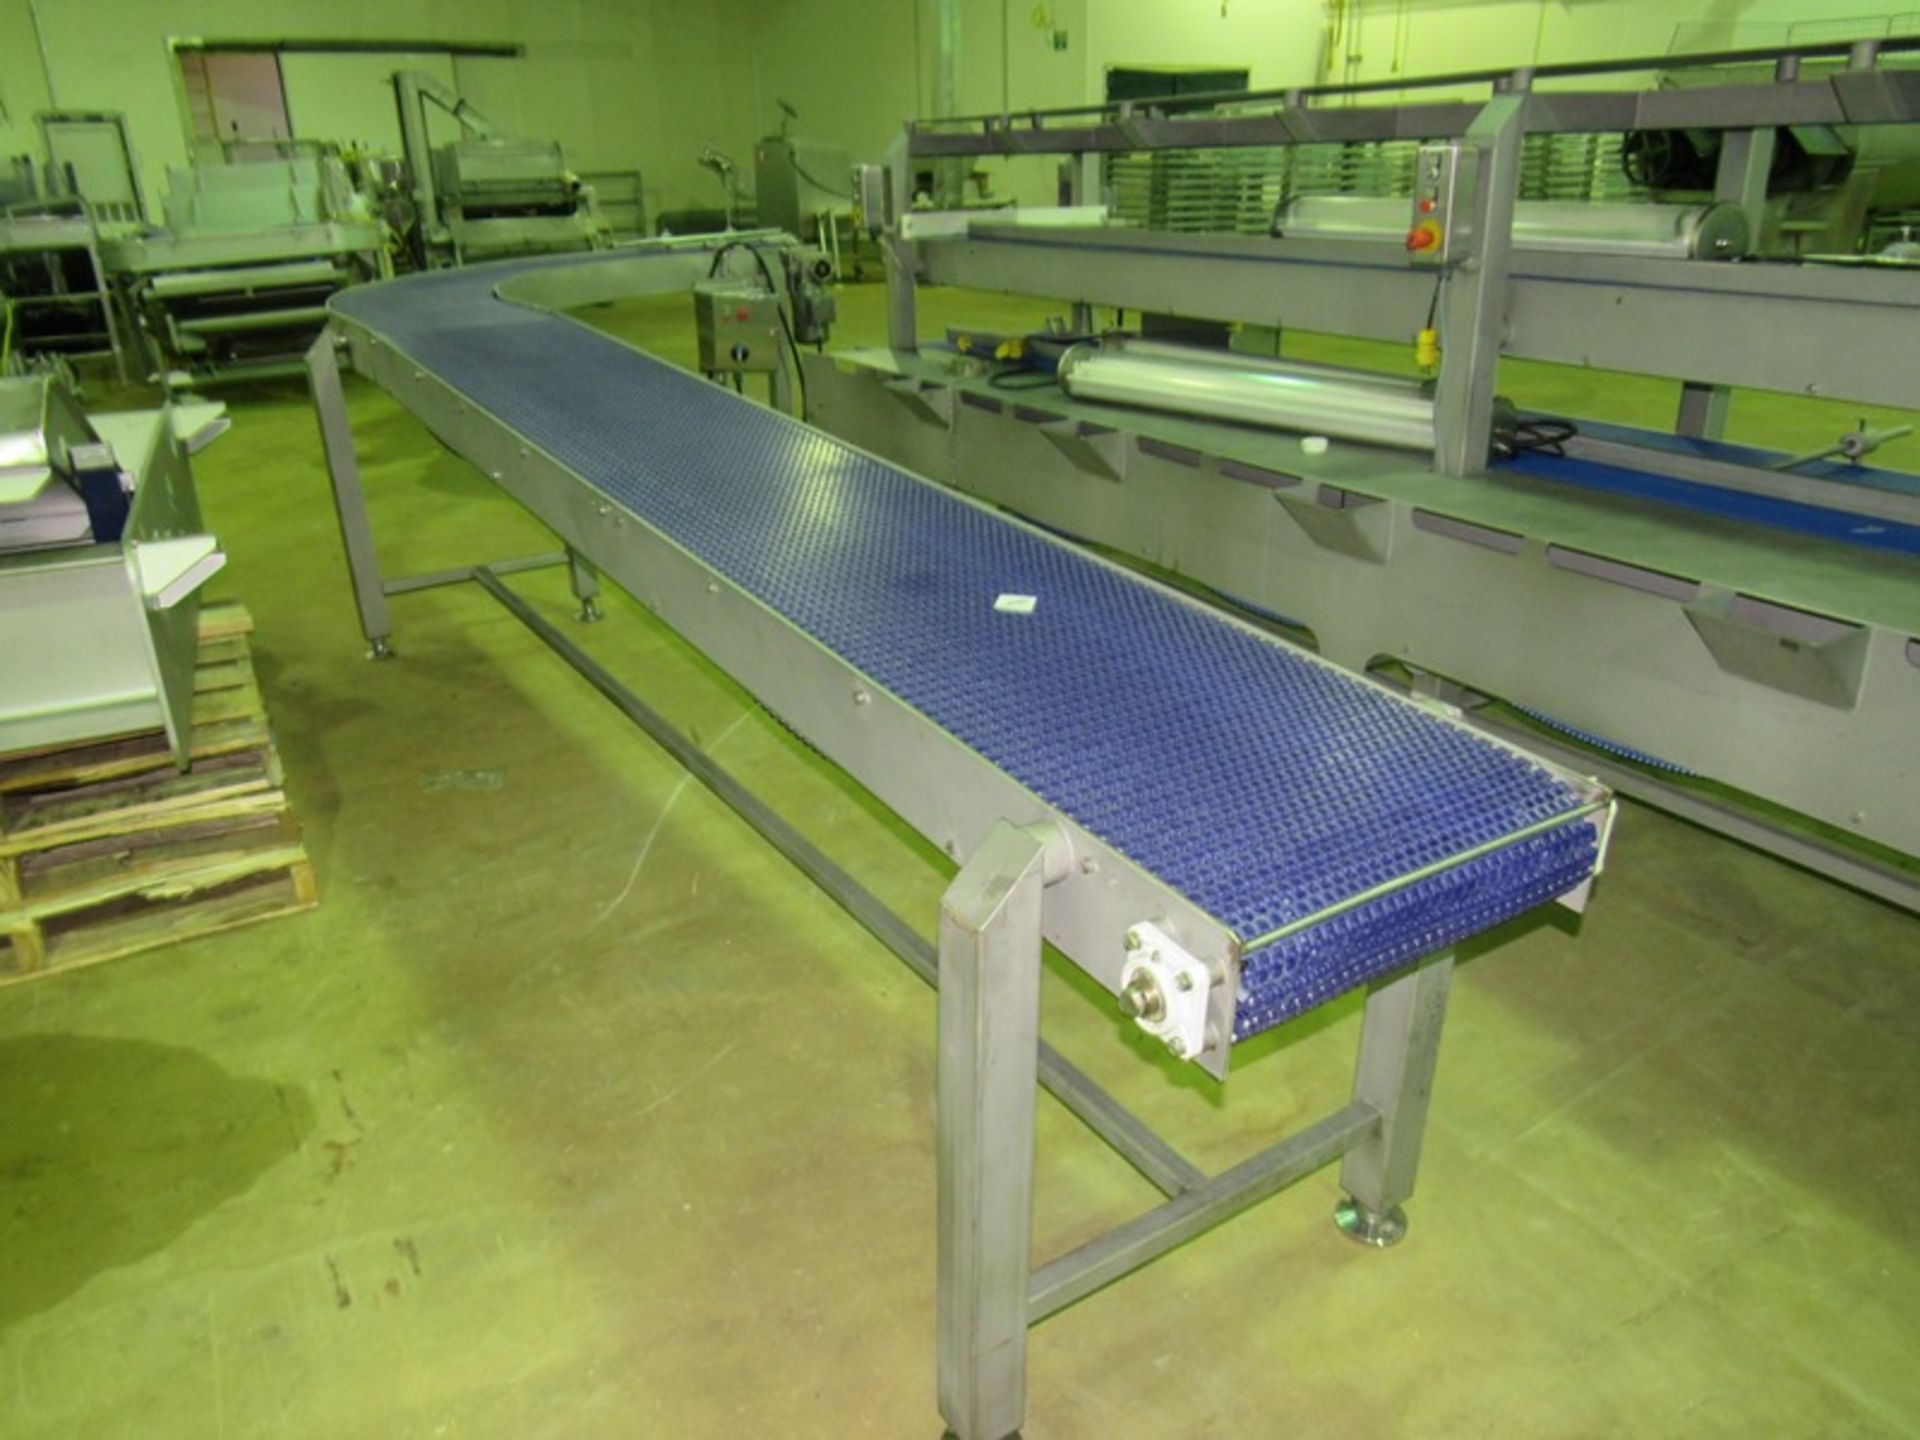 Stainless Steel 90º Conveyor, 19 1/2" W X 20' L blue belt, 12' to turn (Late Pickup Only - March